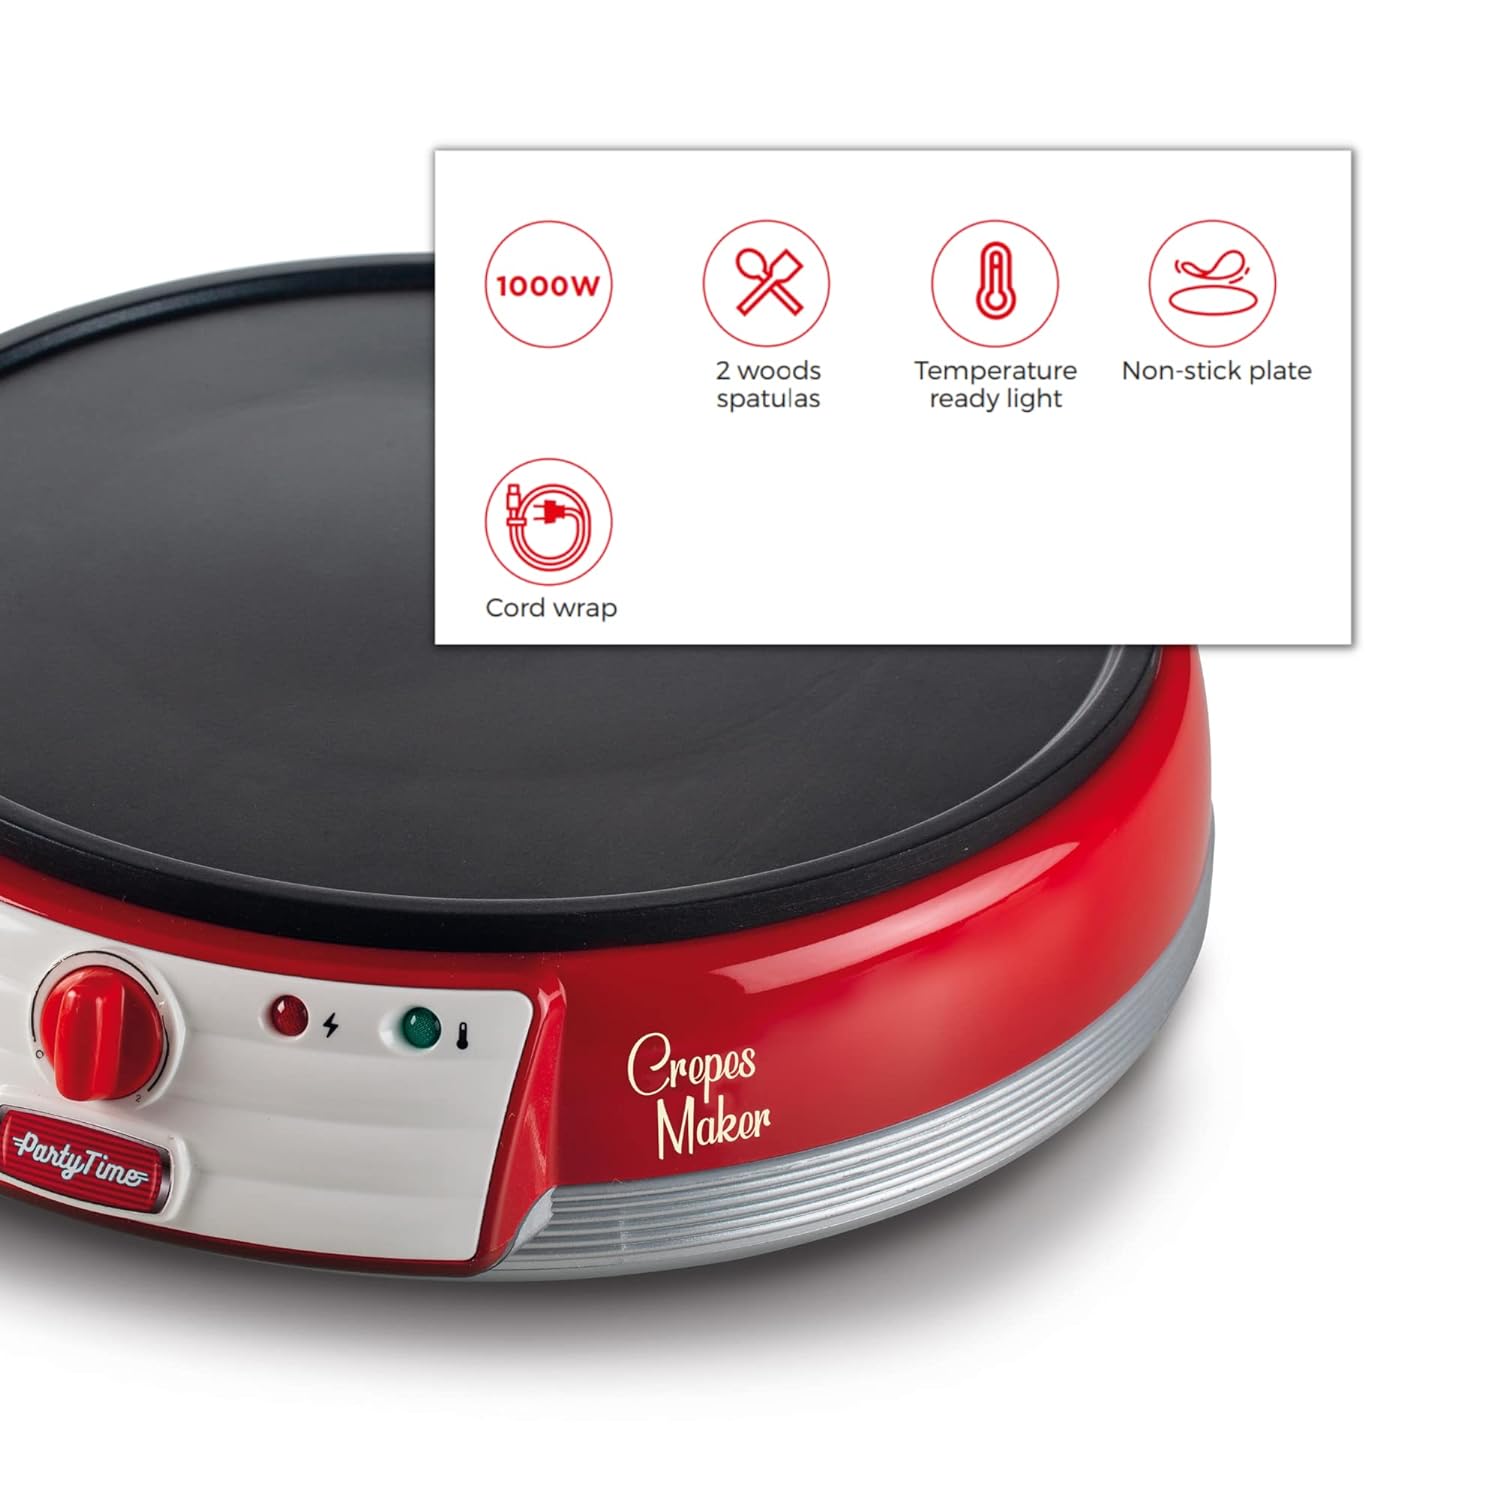 Ariete Electric Crepe Maker Dosa Maker | Portable Crepe Maker with Non-Stick Dipping Plate and Egg Whisk  Mahajan Electronics Online